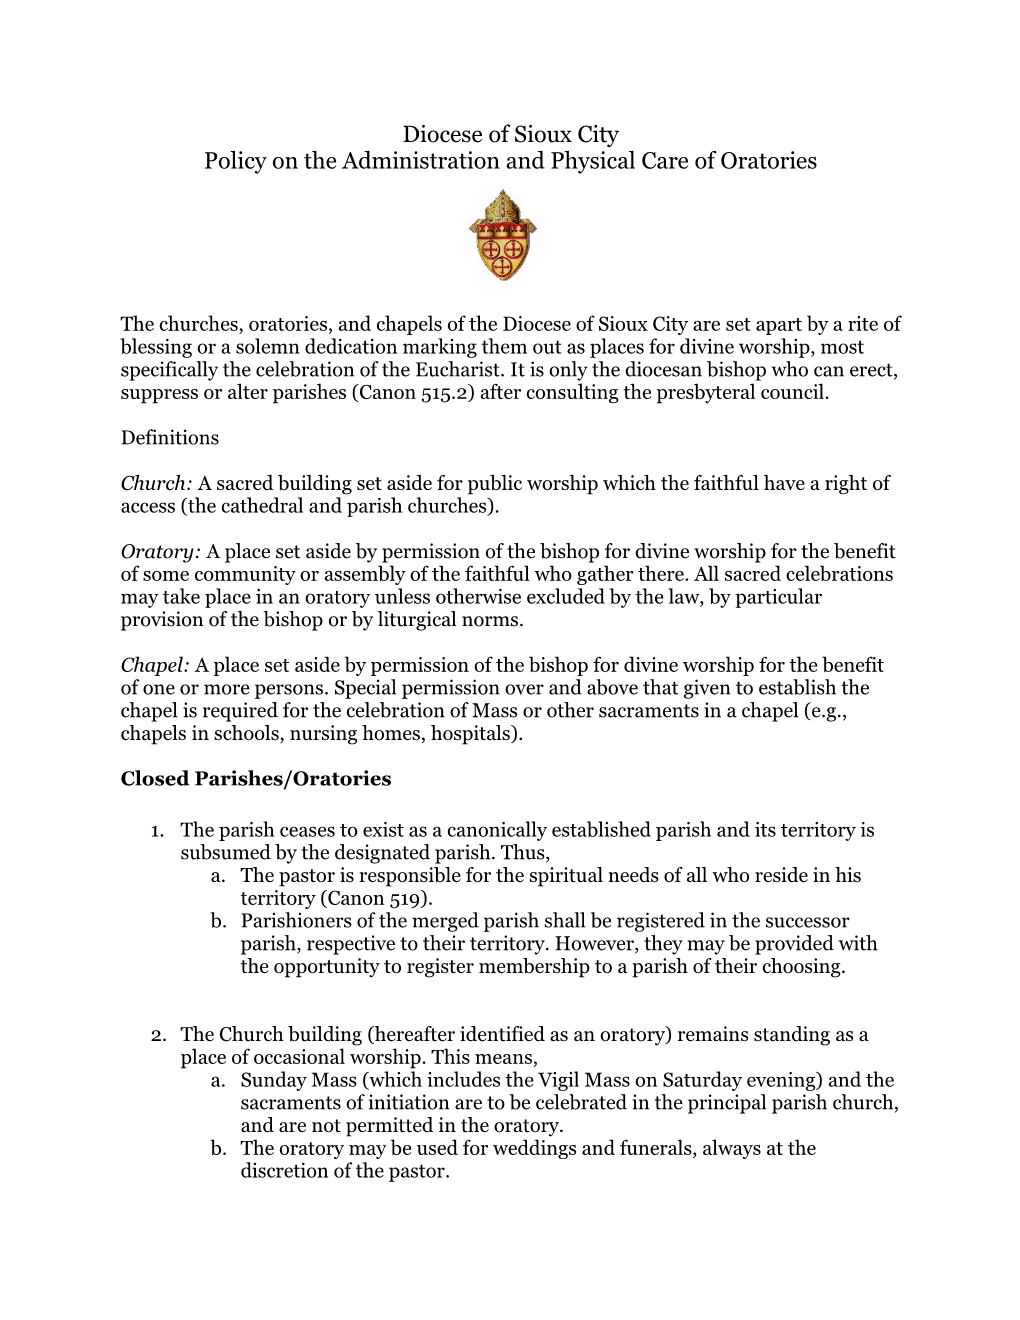 Diocese of Sioux City Policy on the Administration and Physical Care of Oratories